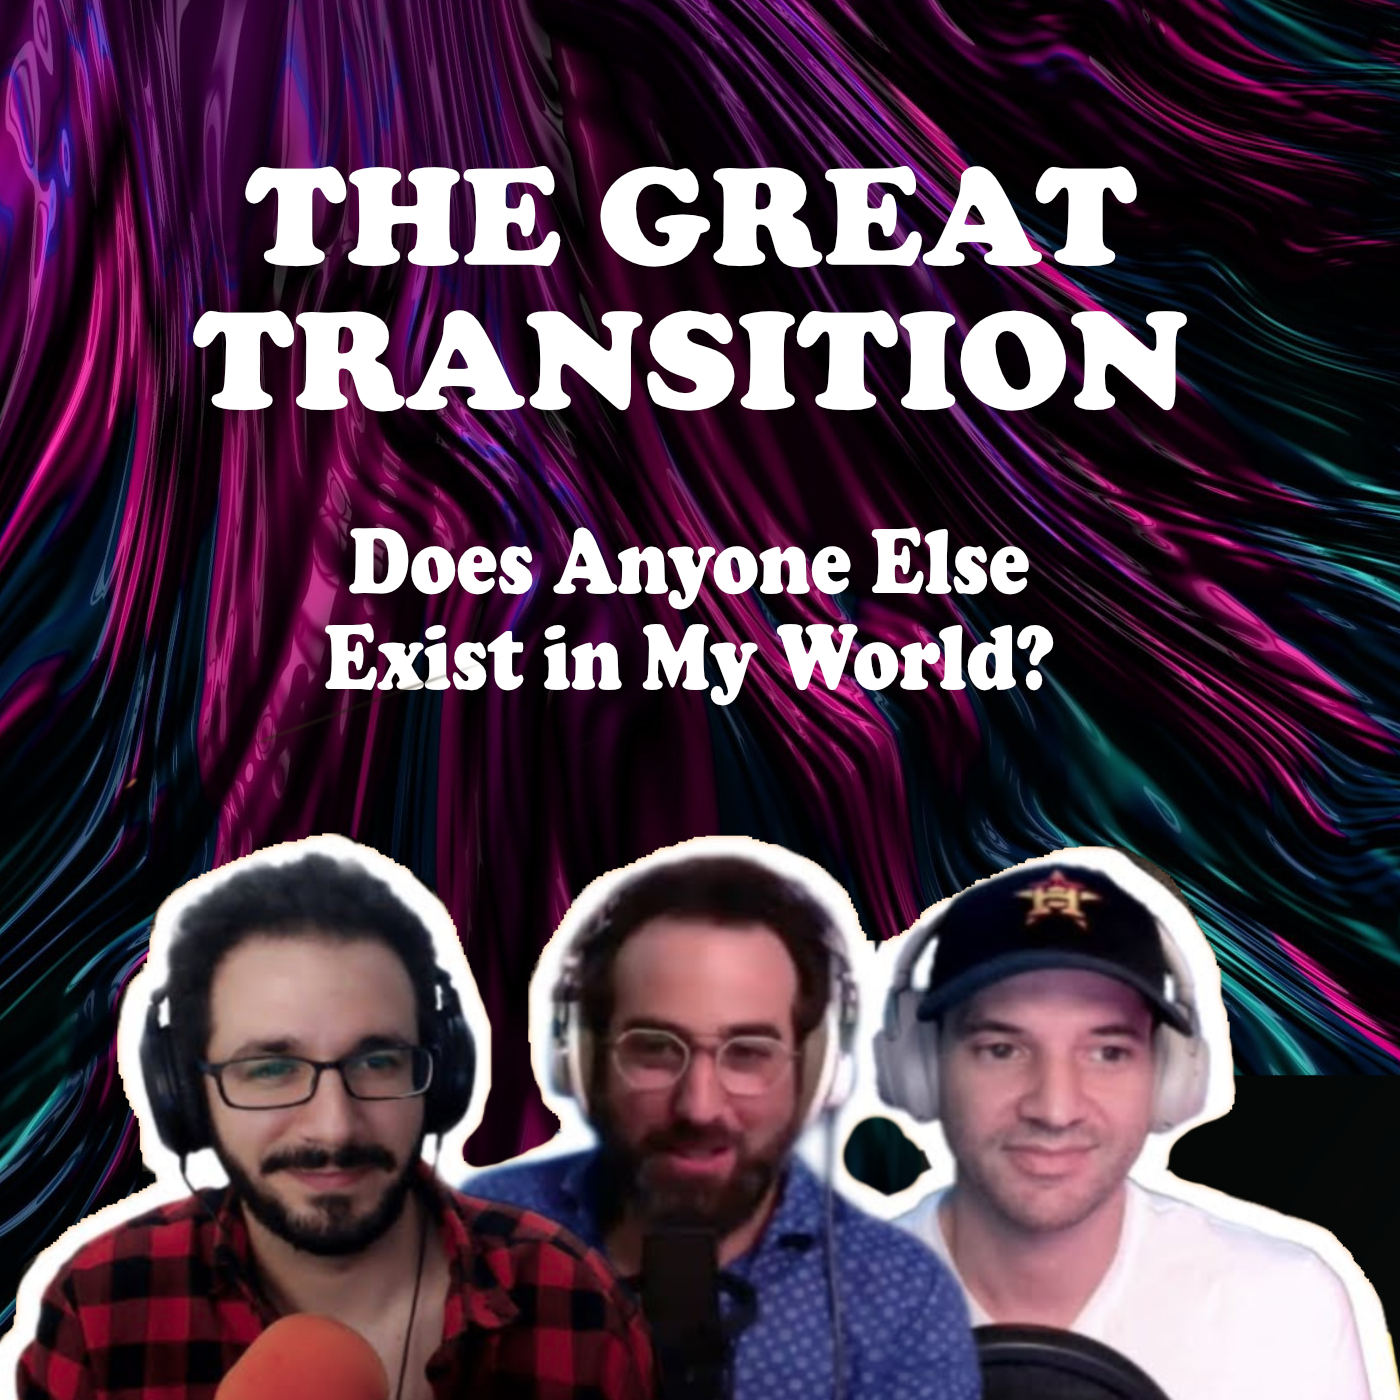 The Great Transition - Does Anyone Else Exist in My World?